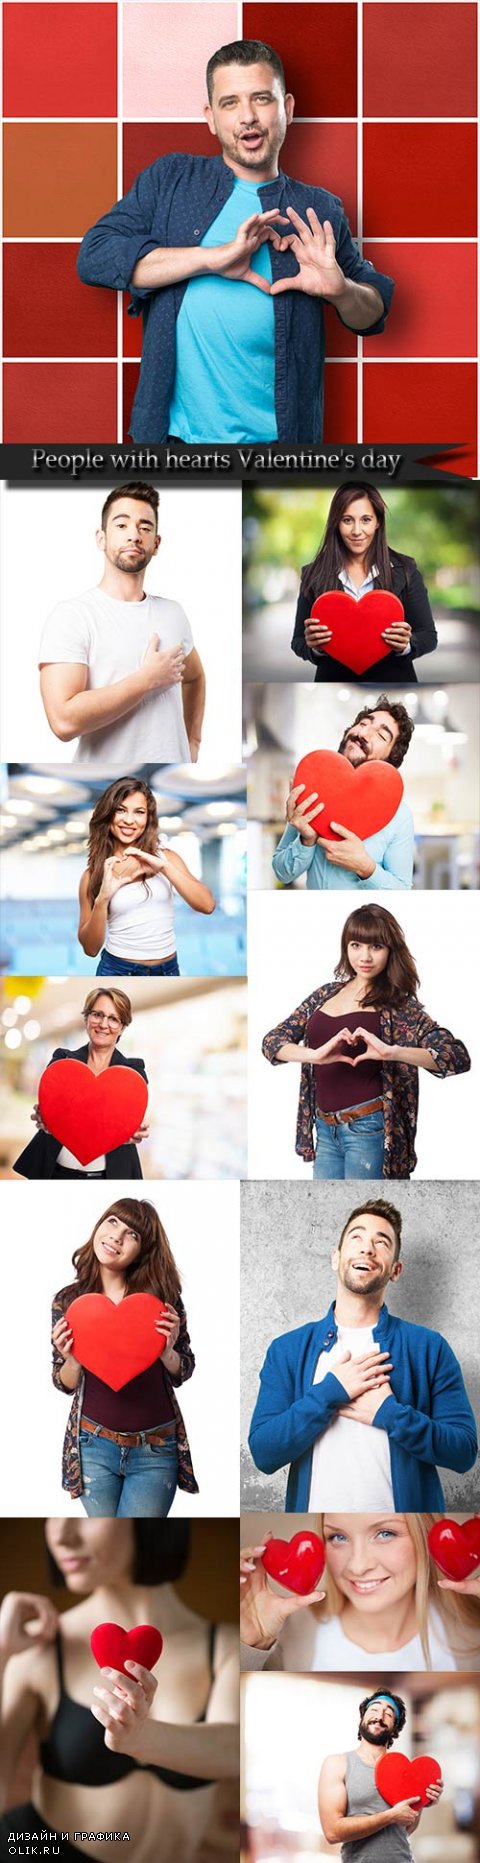 People with hearts Valentine's day